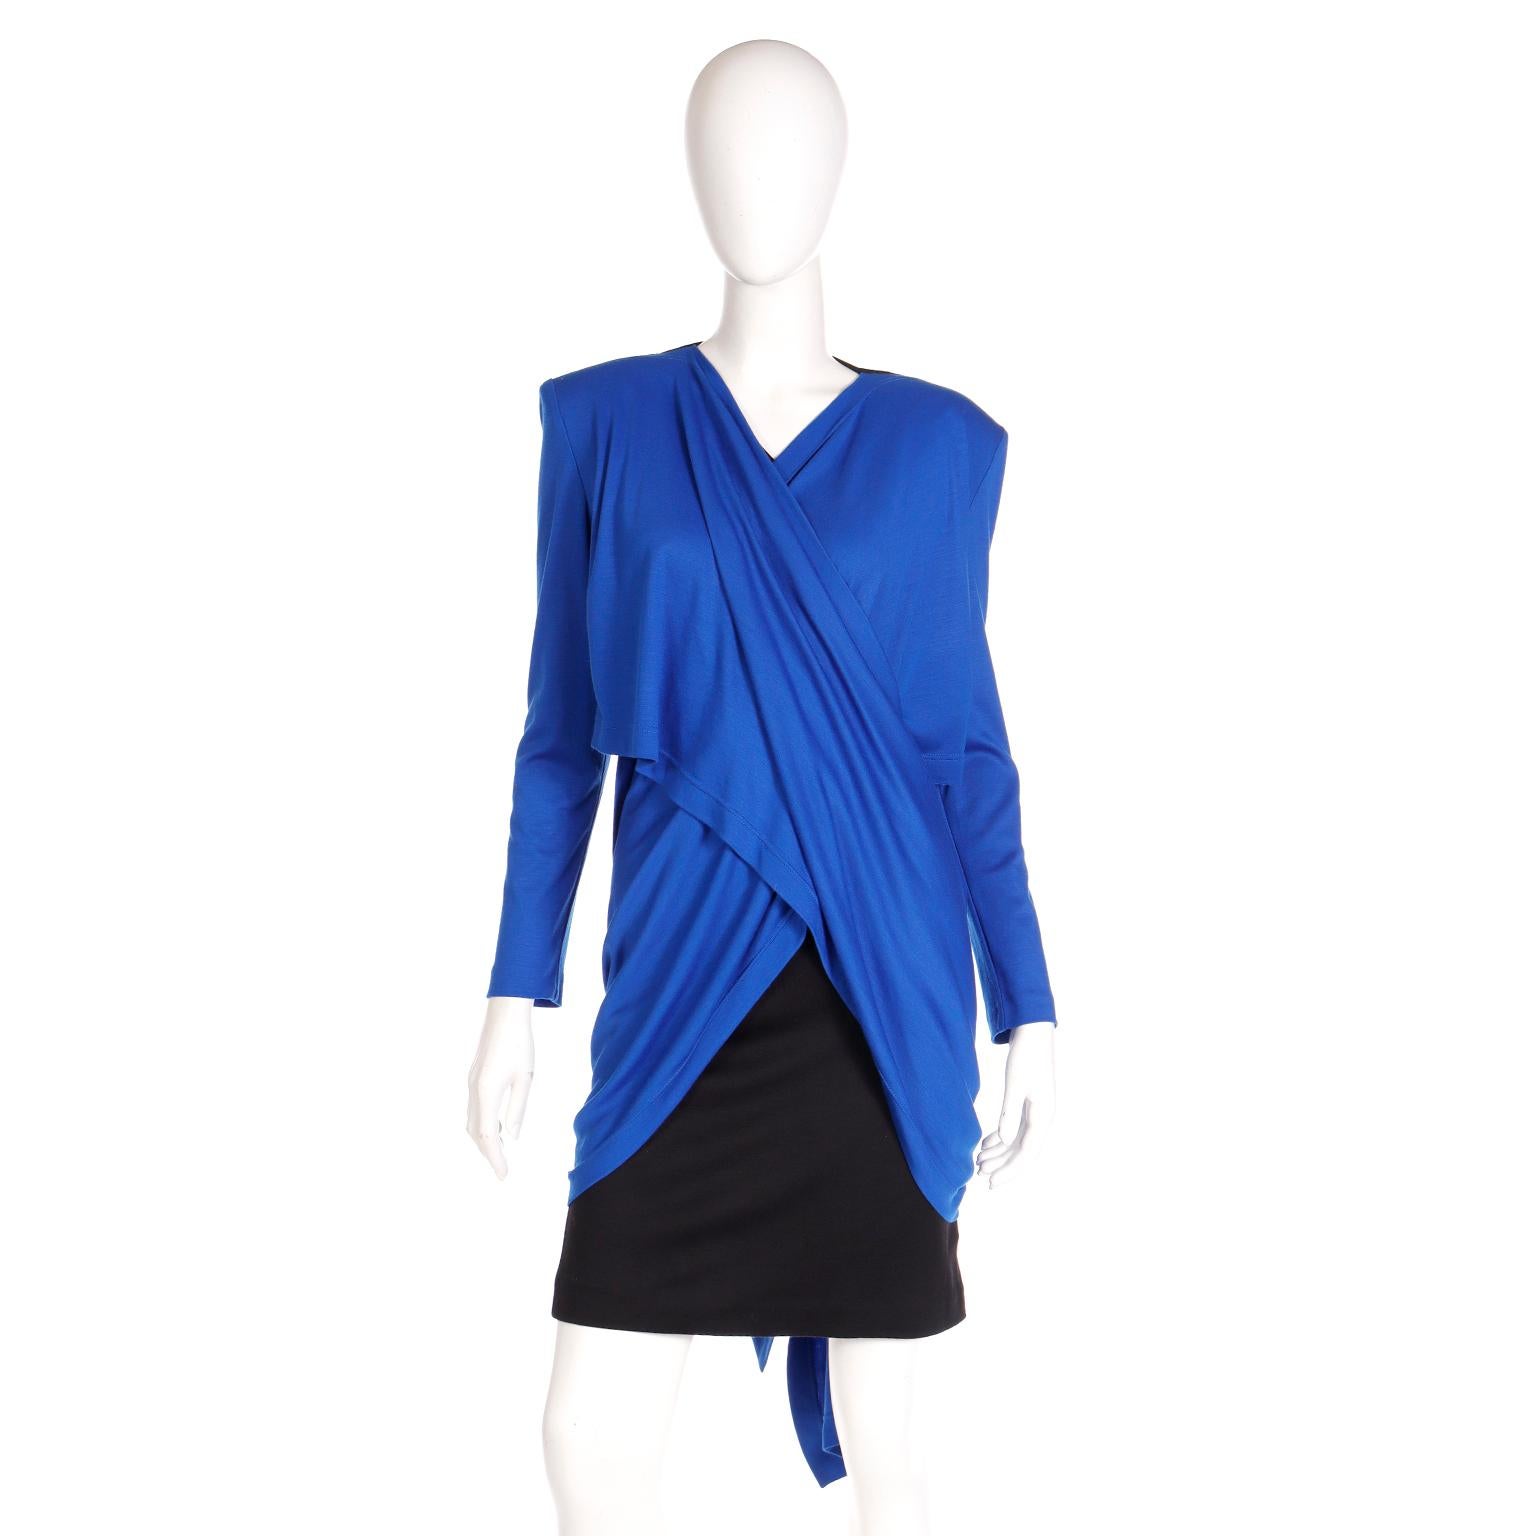 FW 1989 Patrick Kelly Runway Dress in Blue & Black Knit with Head Scarf  For Sale 8